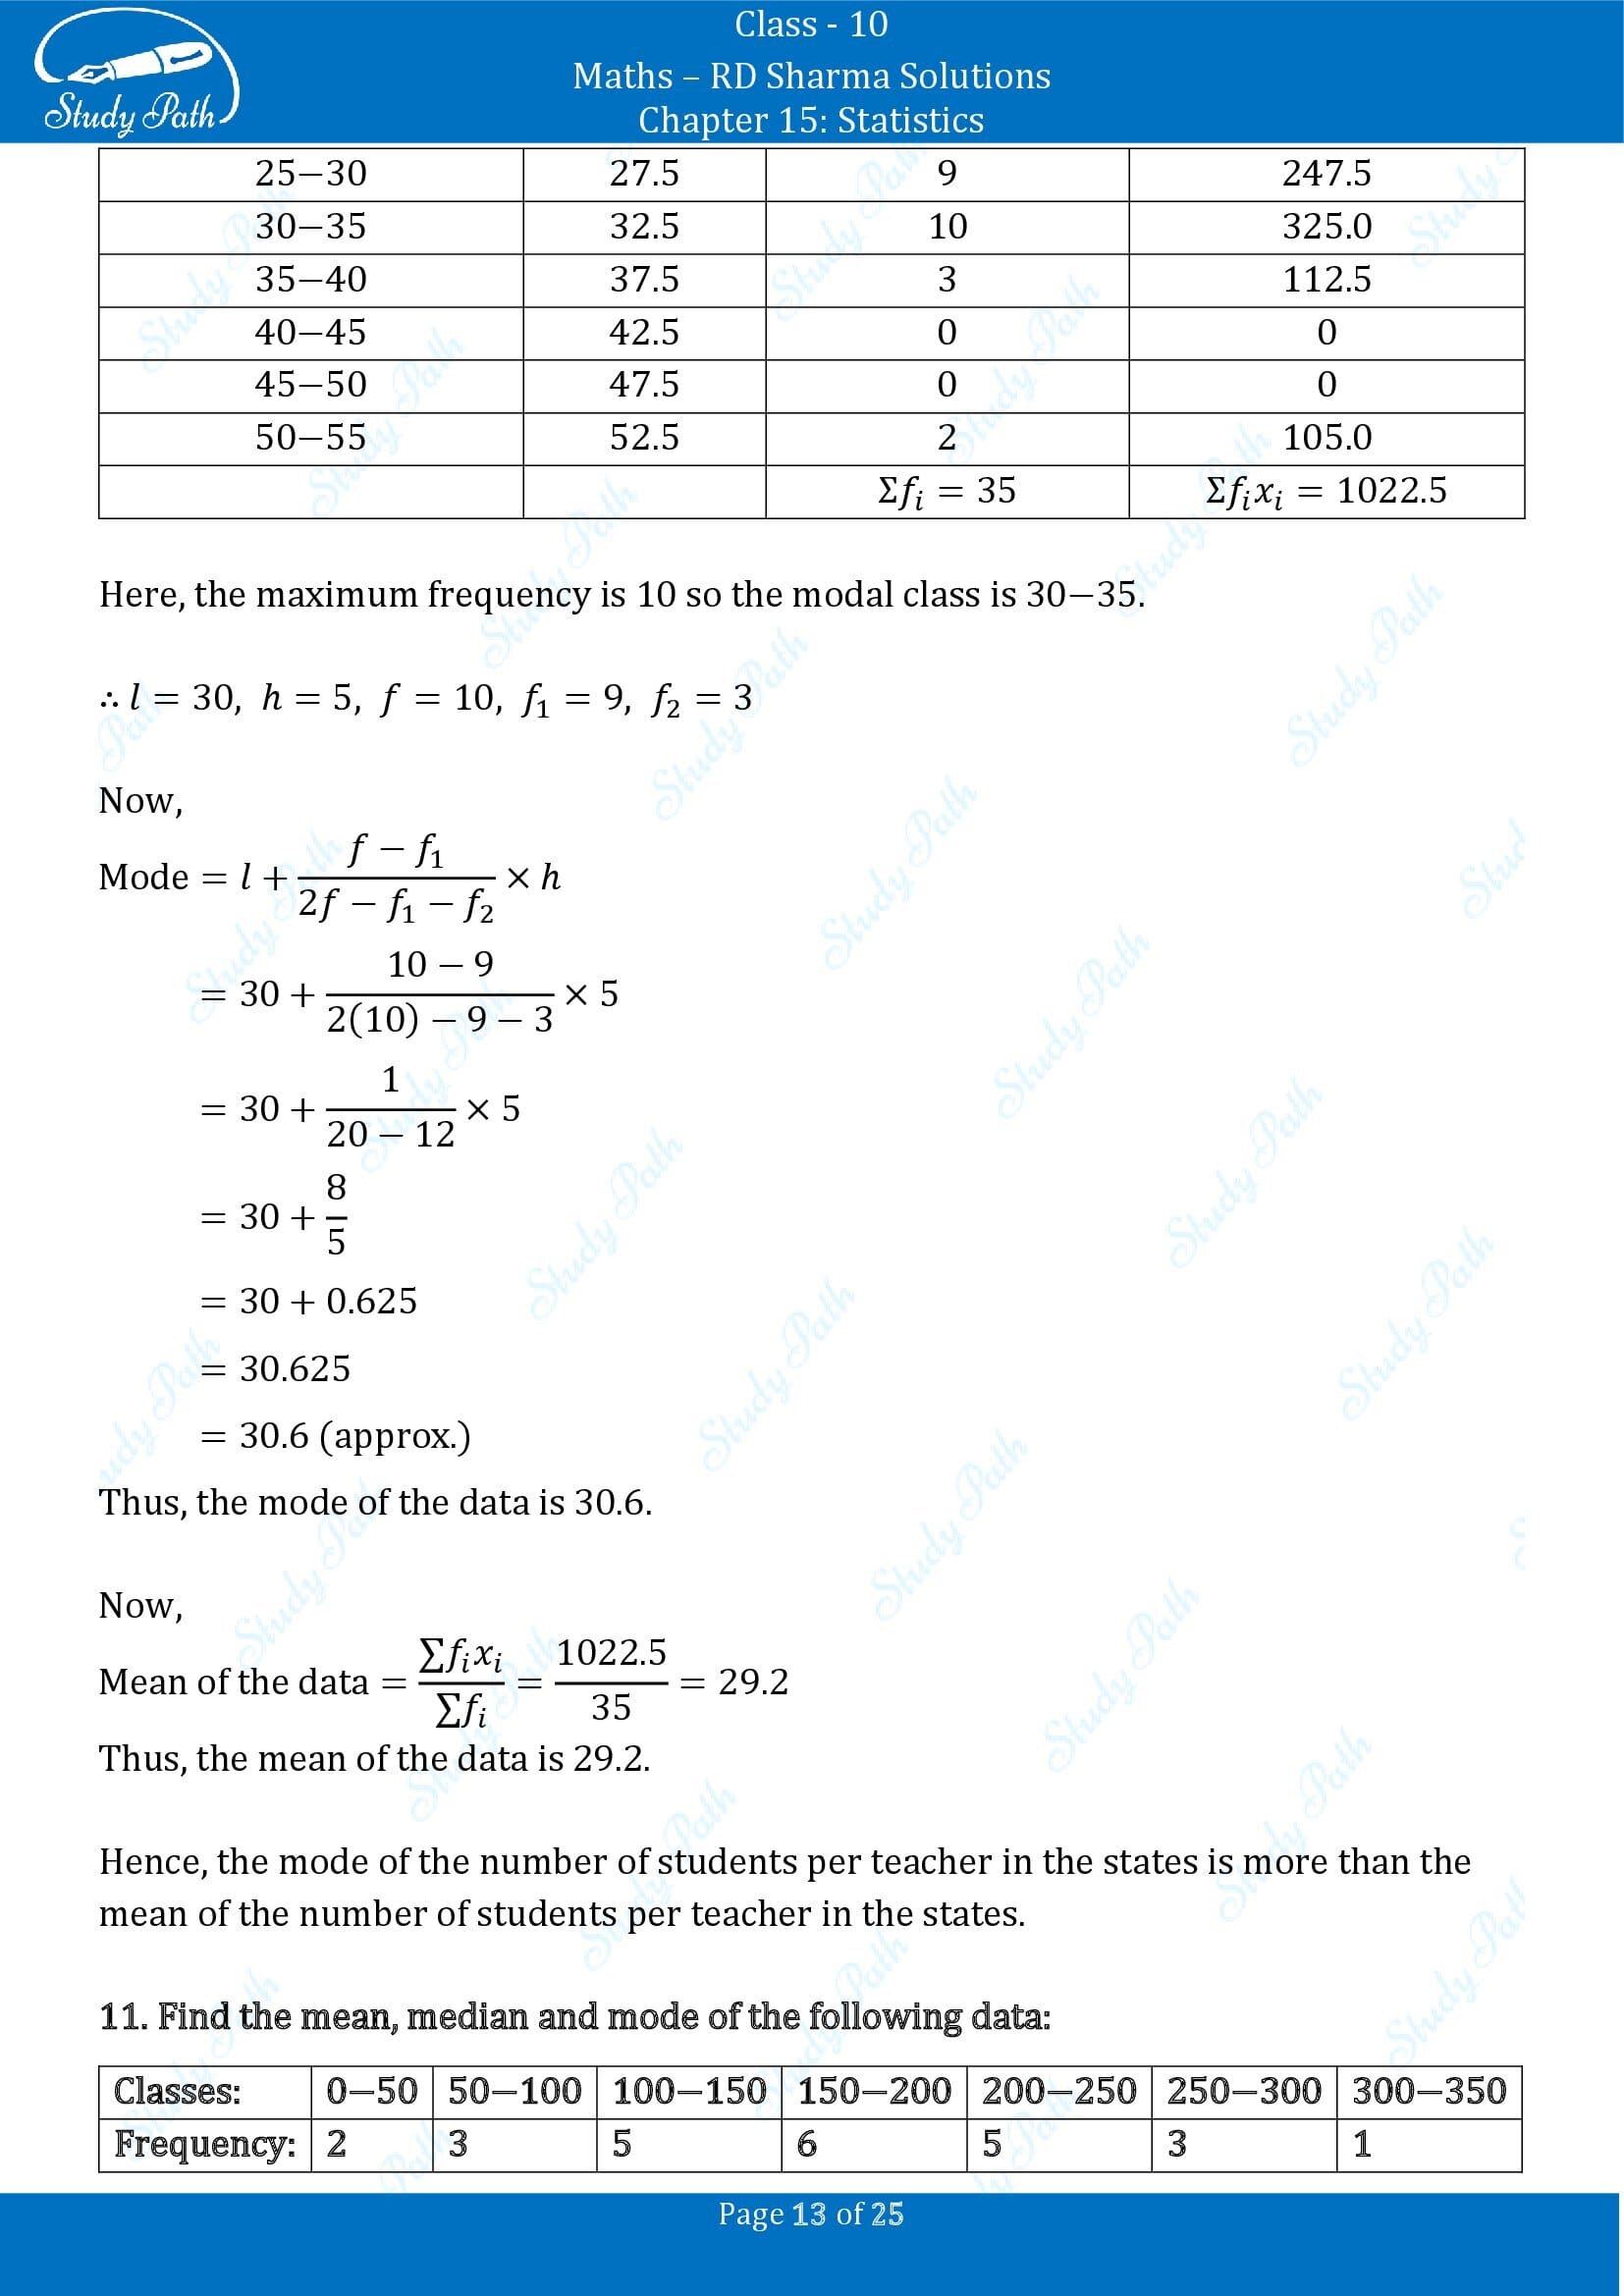 RD Sharma Solutions Class 10 Chapter 15 Statistics Exercise 15.5 00013